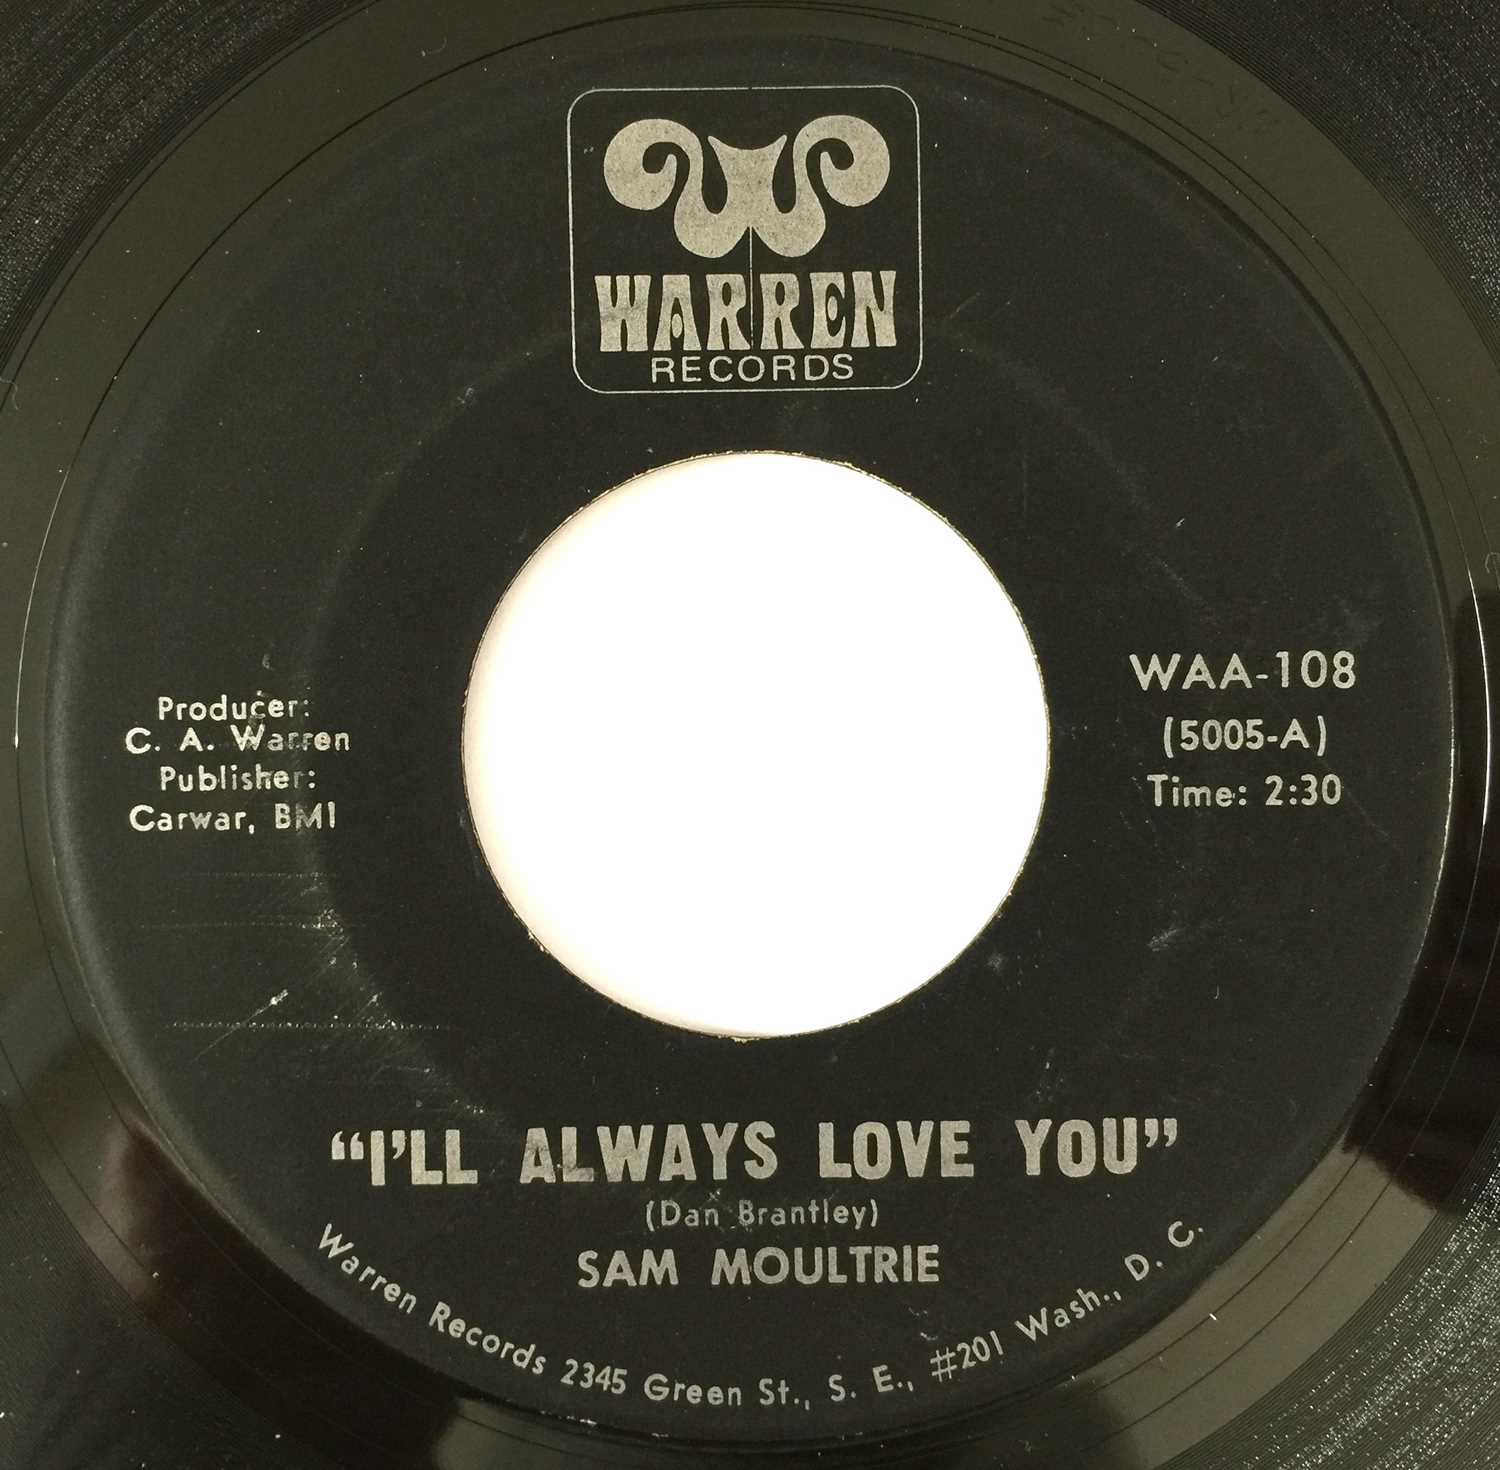 Lot 22 - SAM MOULTRIE -I'LL ALWAYS LOVE YOU/ DO YOUR OWN THING 7" (US SOUL - WARREN RECORDS WAA-108)